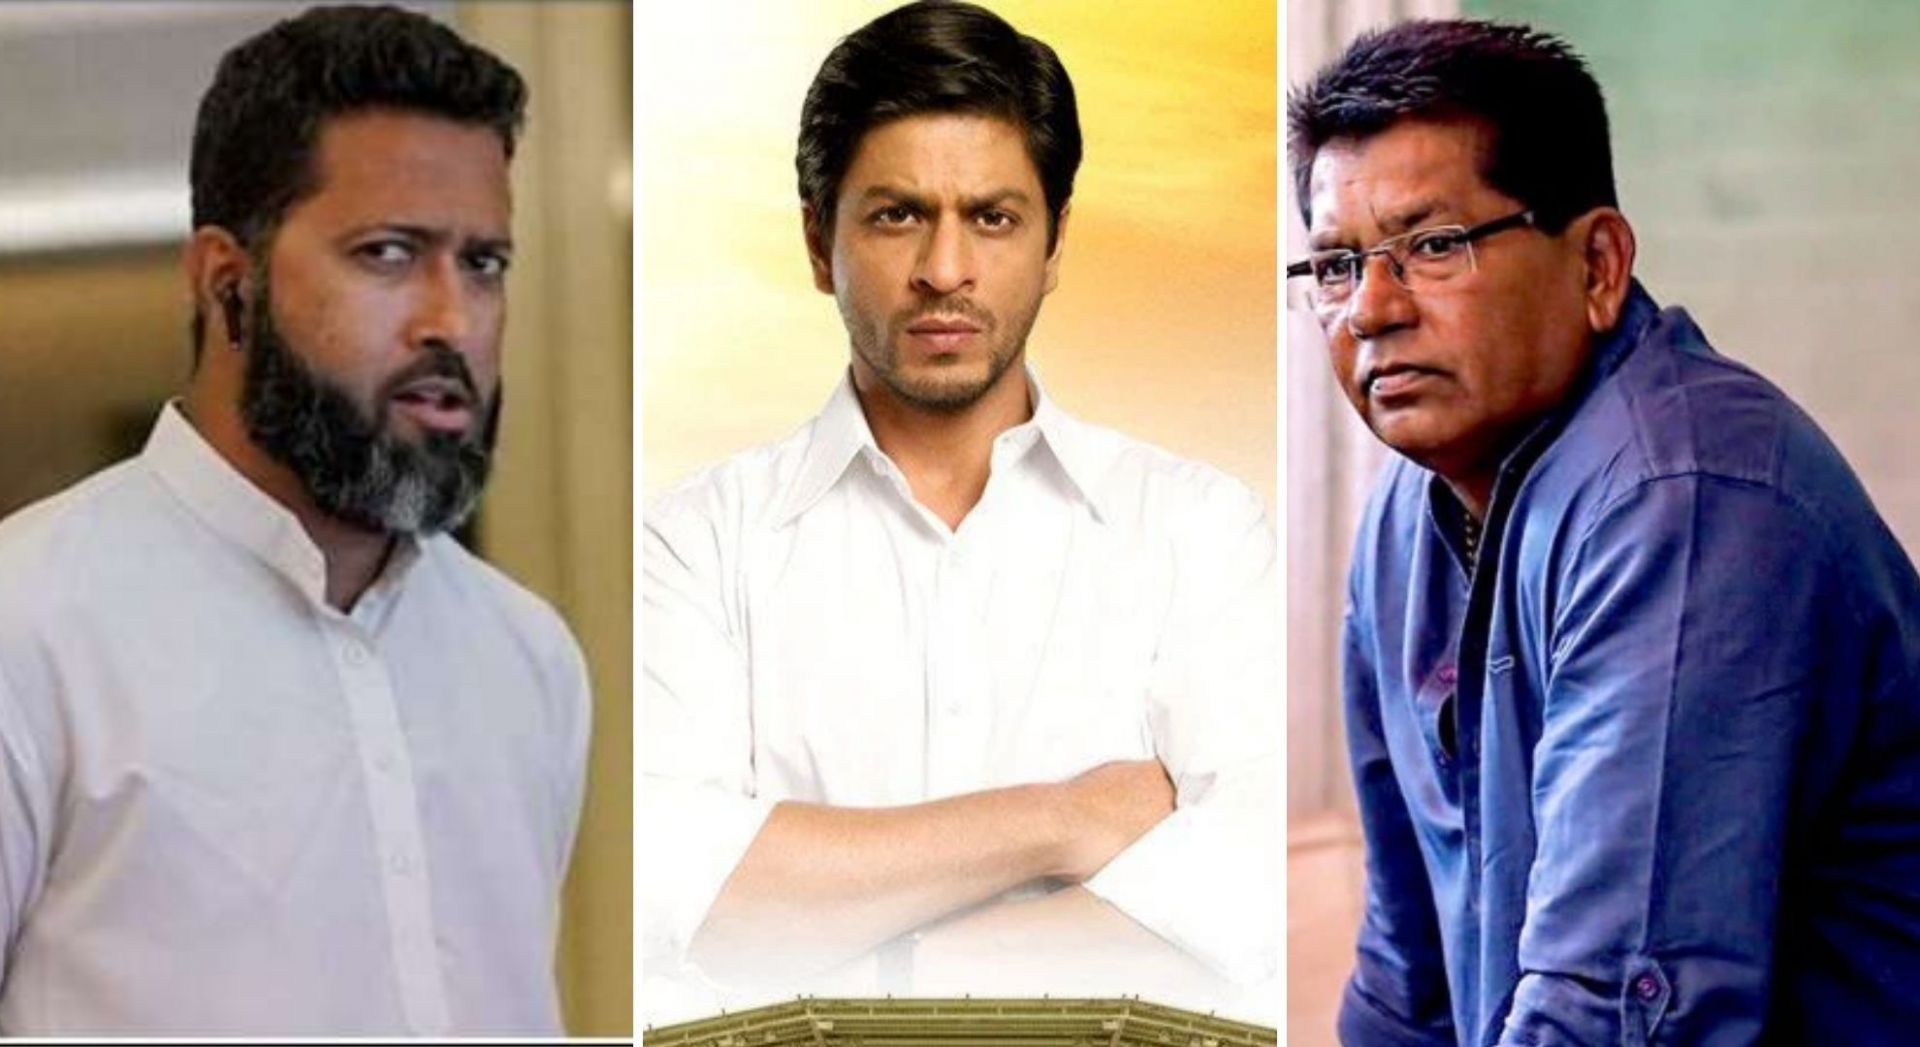 From Sir Alex Ferguson to Kabir Khan of Chak De! India, Chandrakant Pandit (R) is being hailed through comparisons with famous reel and real coaches